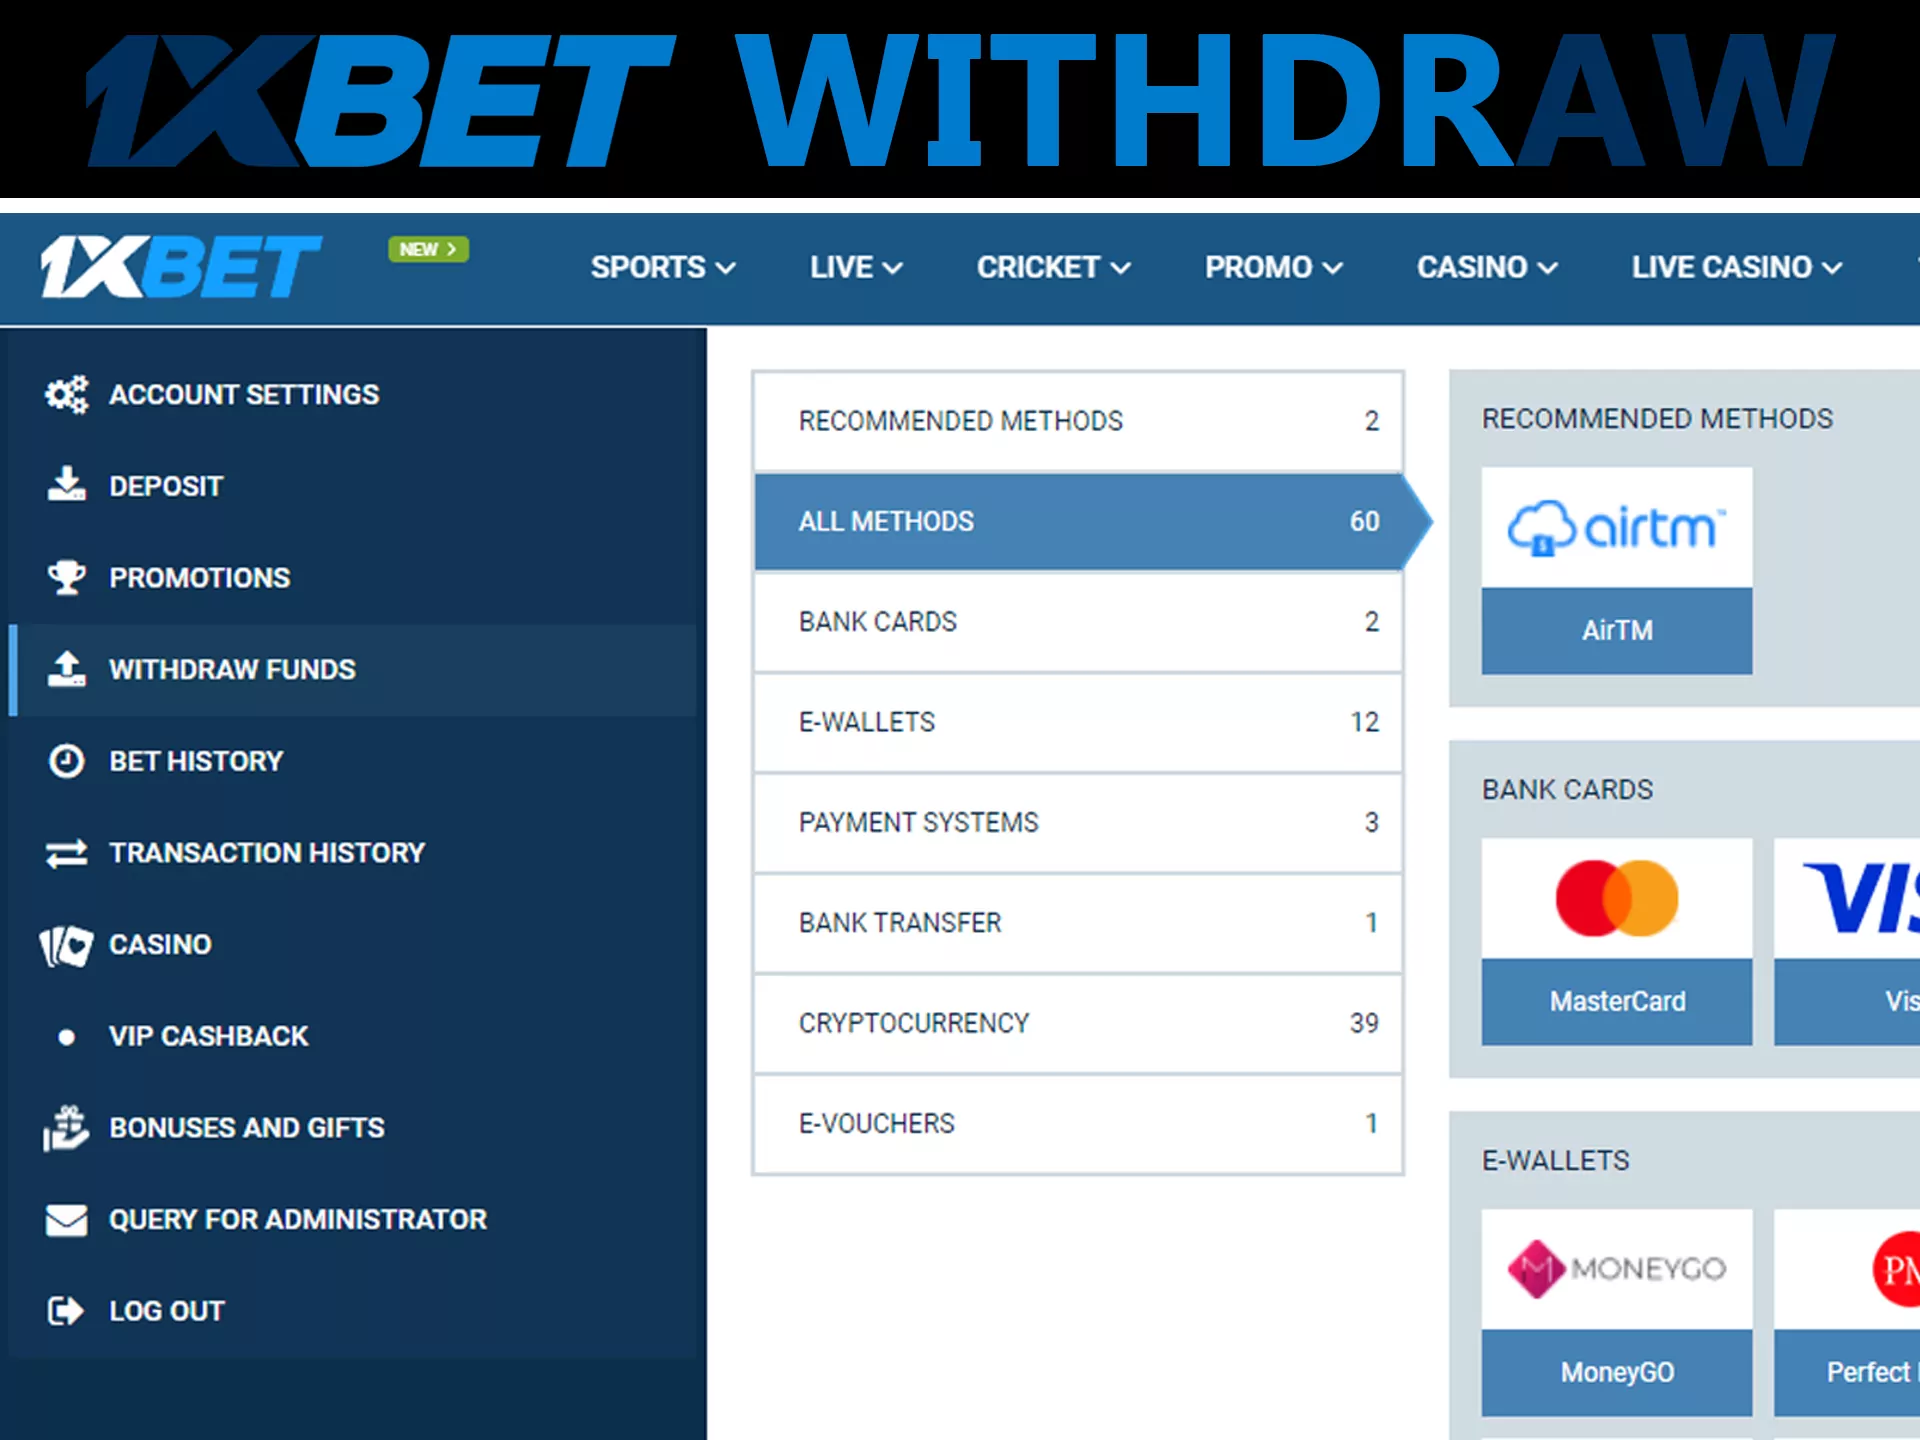 1xbet withdrawal – step-by-step instruction.